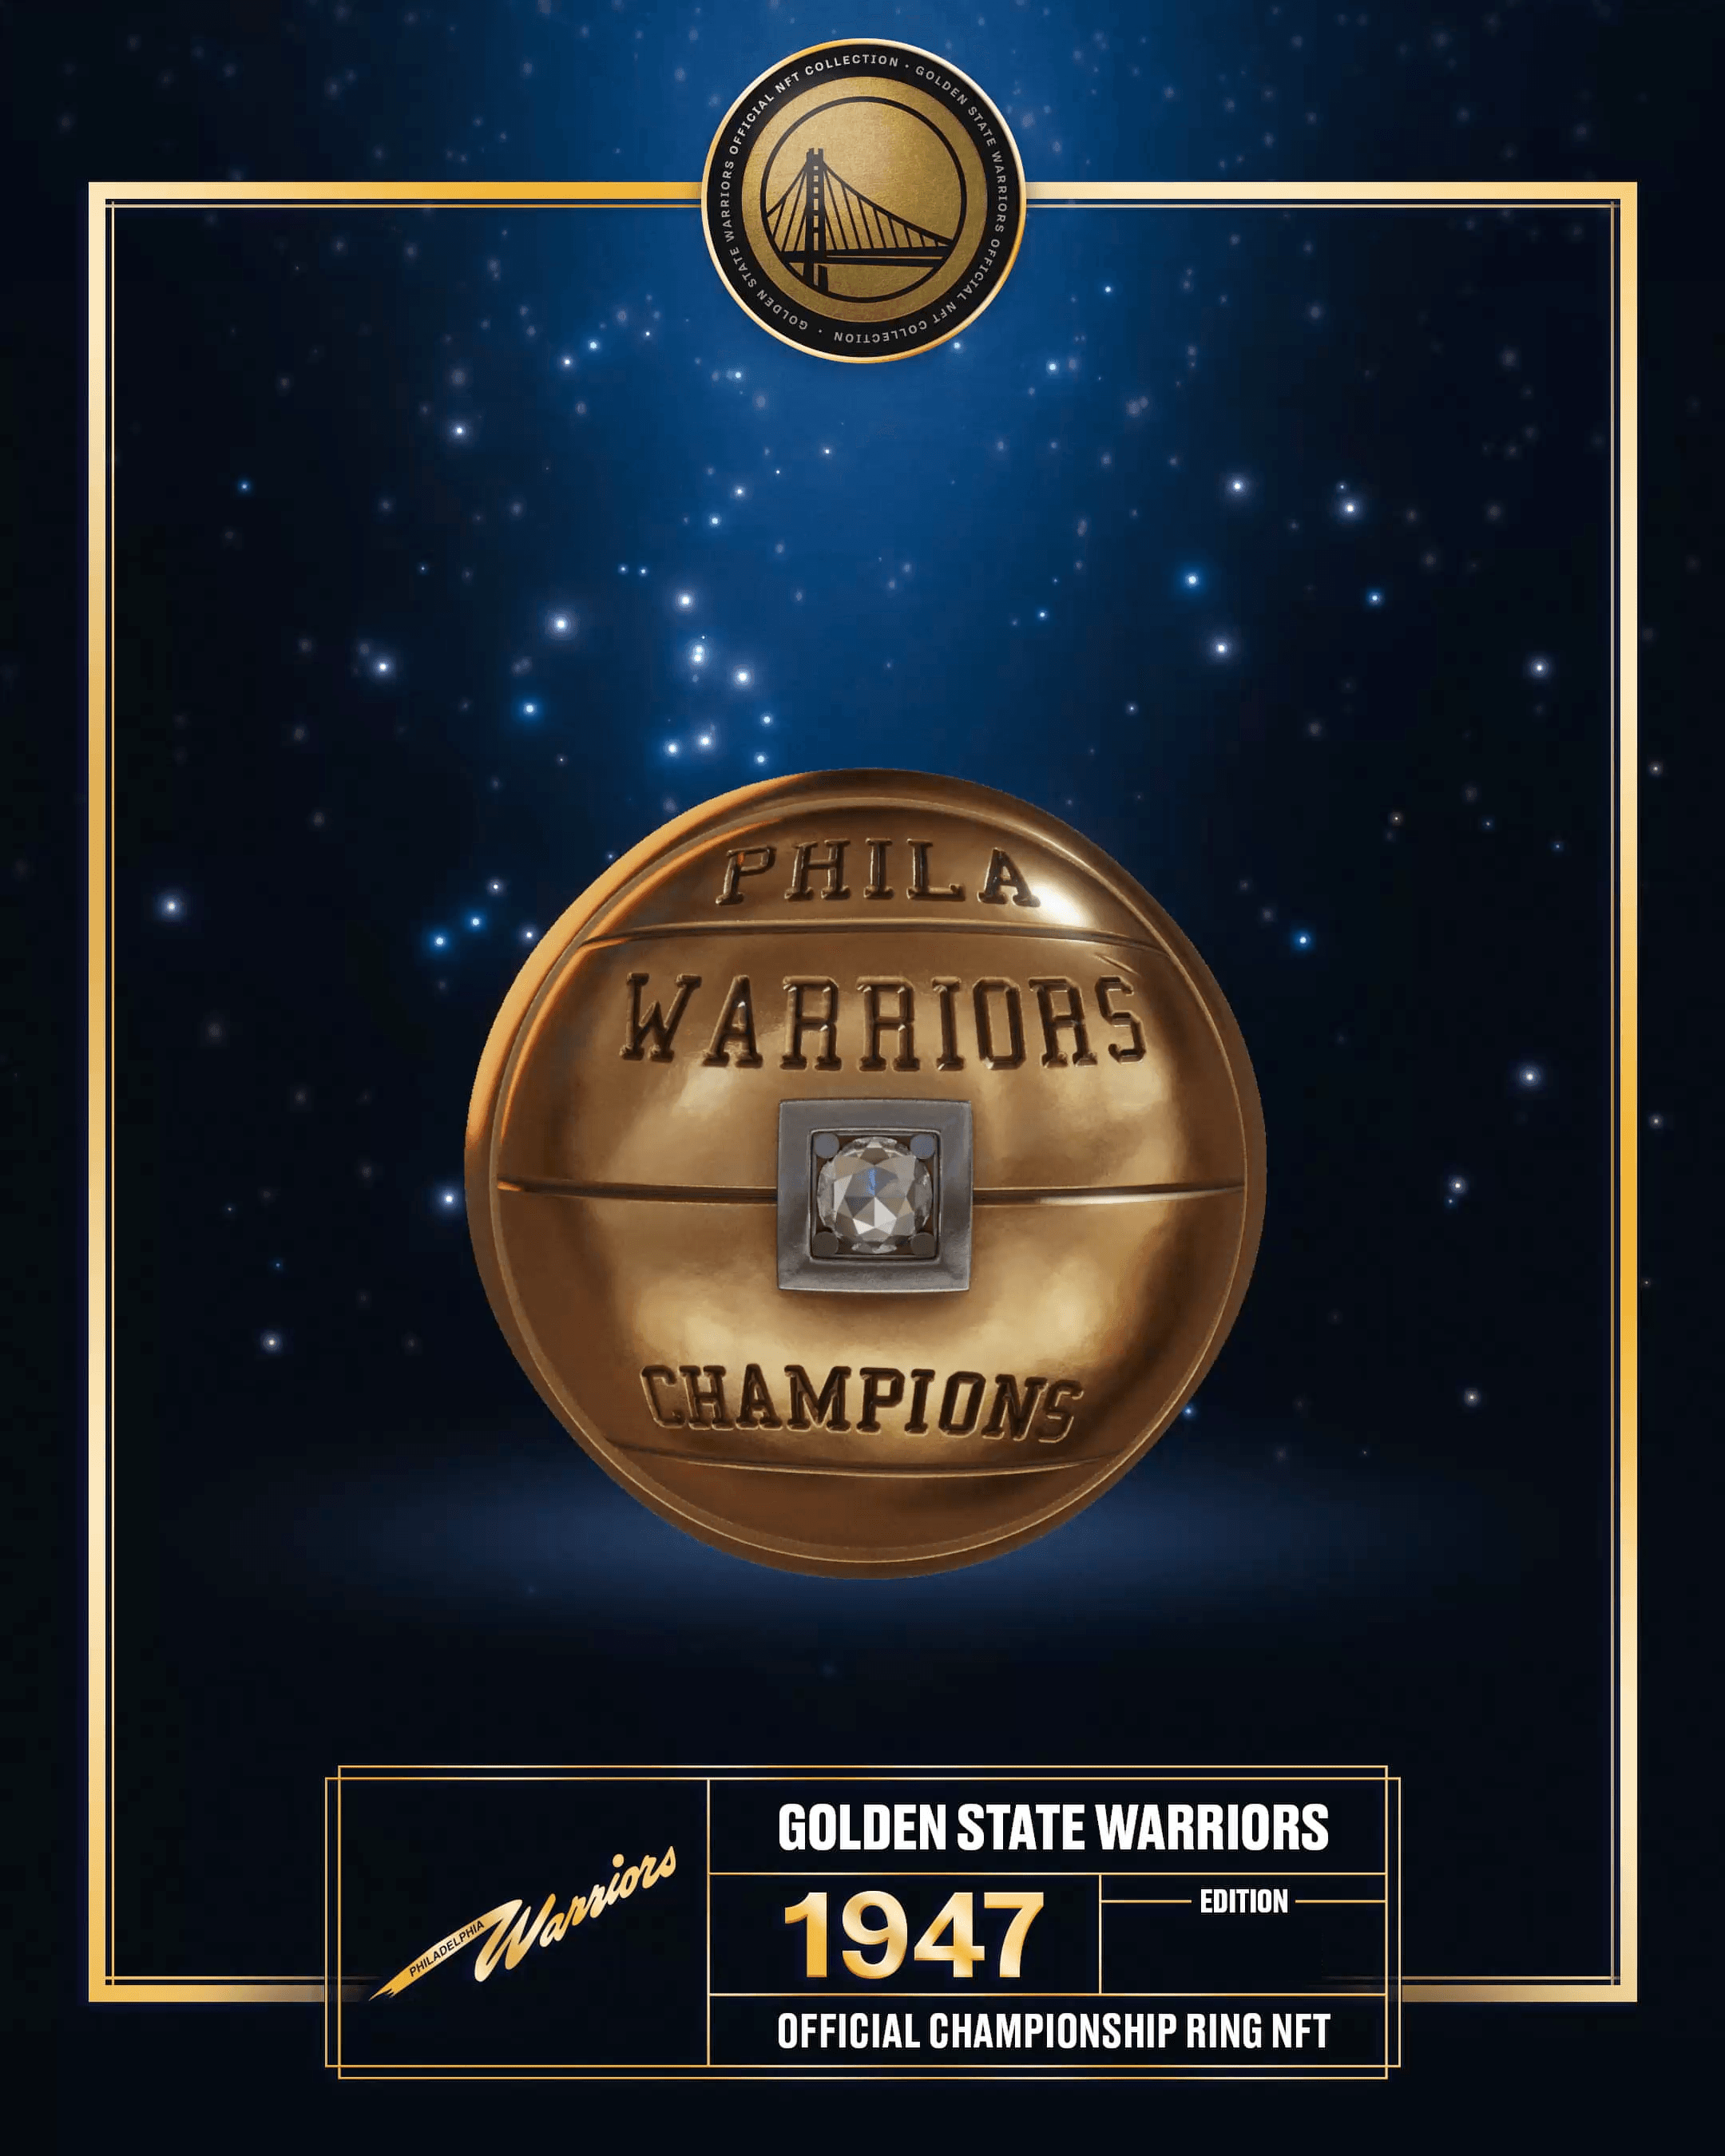 Golden State Warriors Become Launch Official NFT